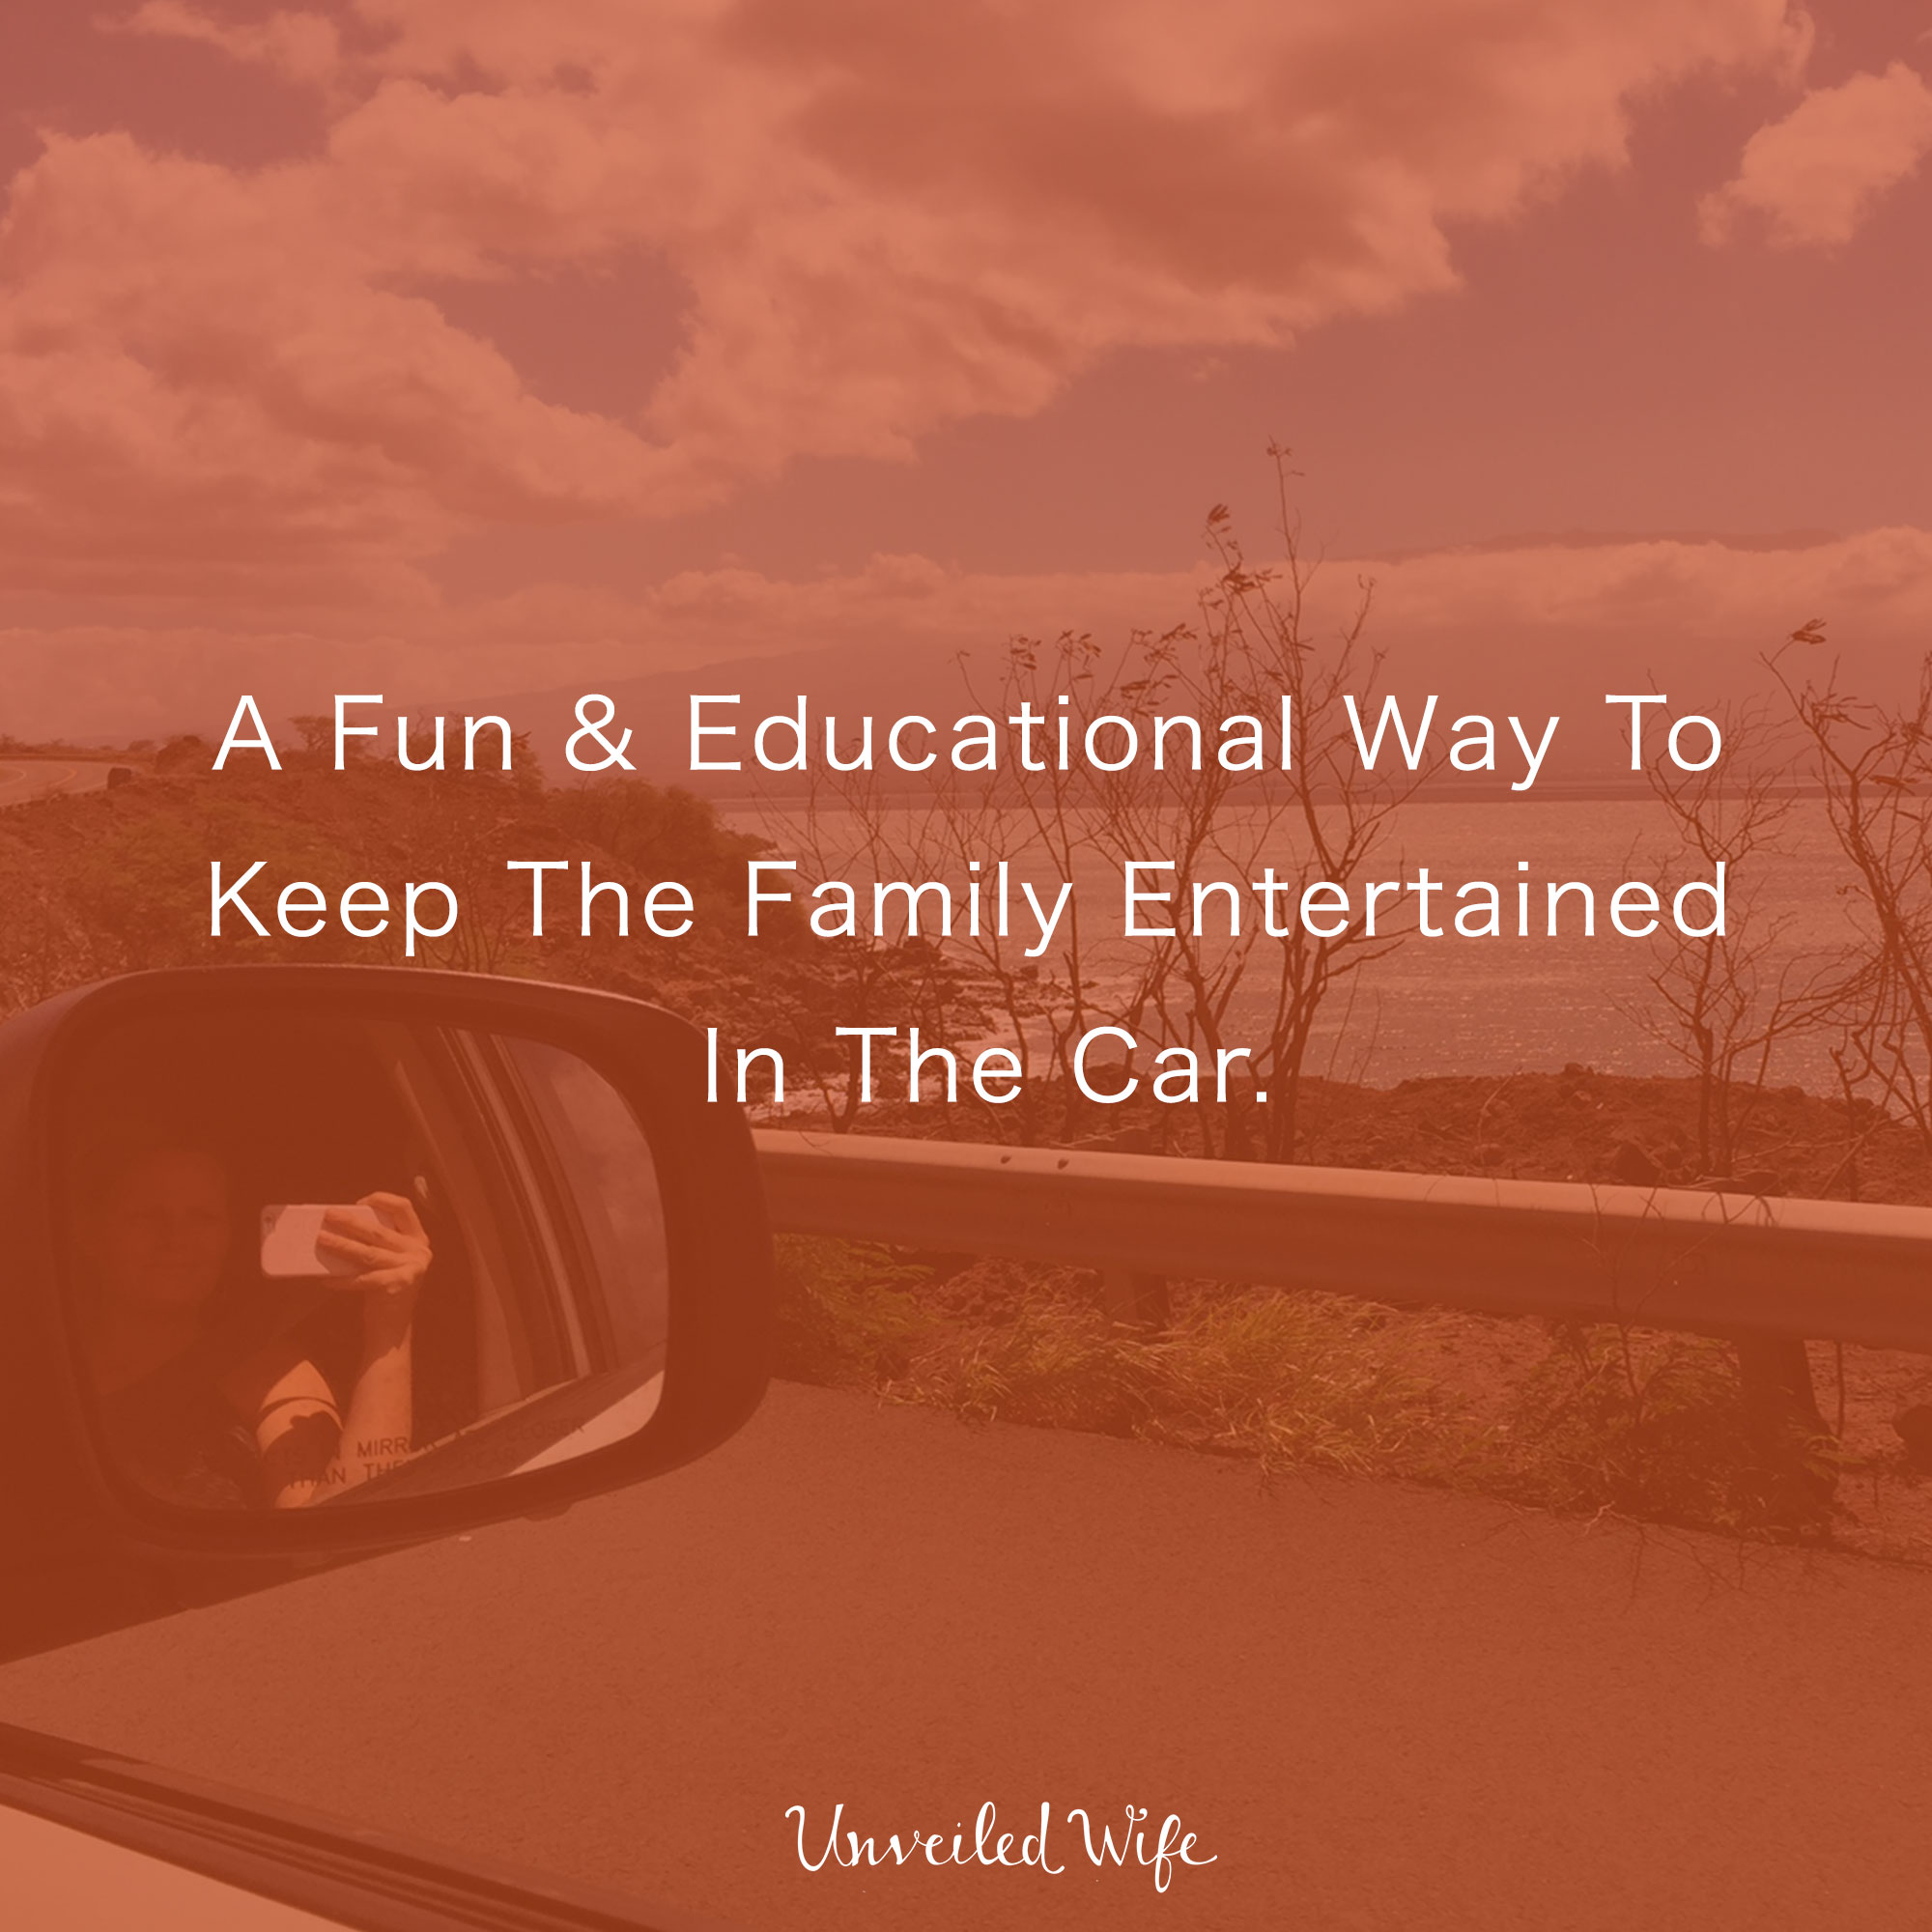 A Fun & Educational Way To Keep The Family Entertained In The Car | Review